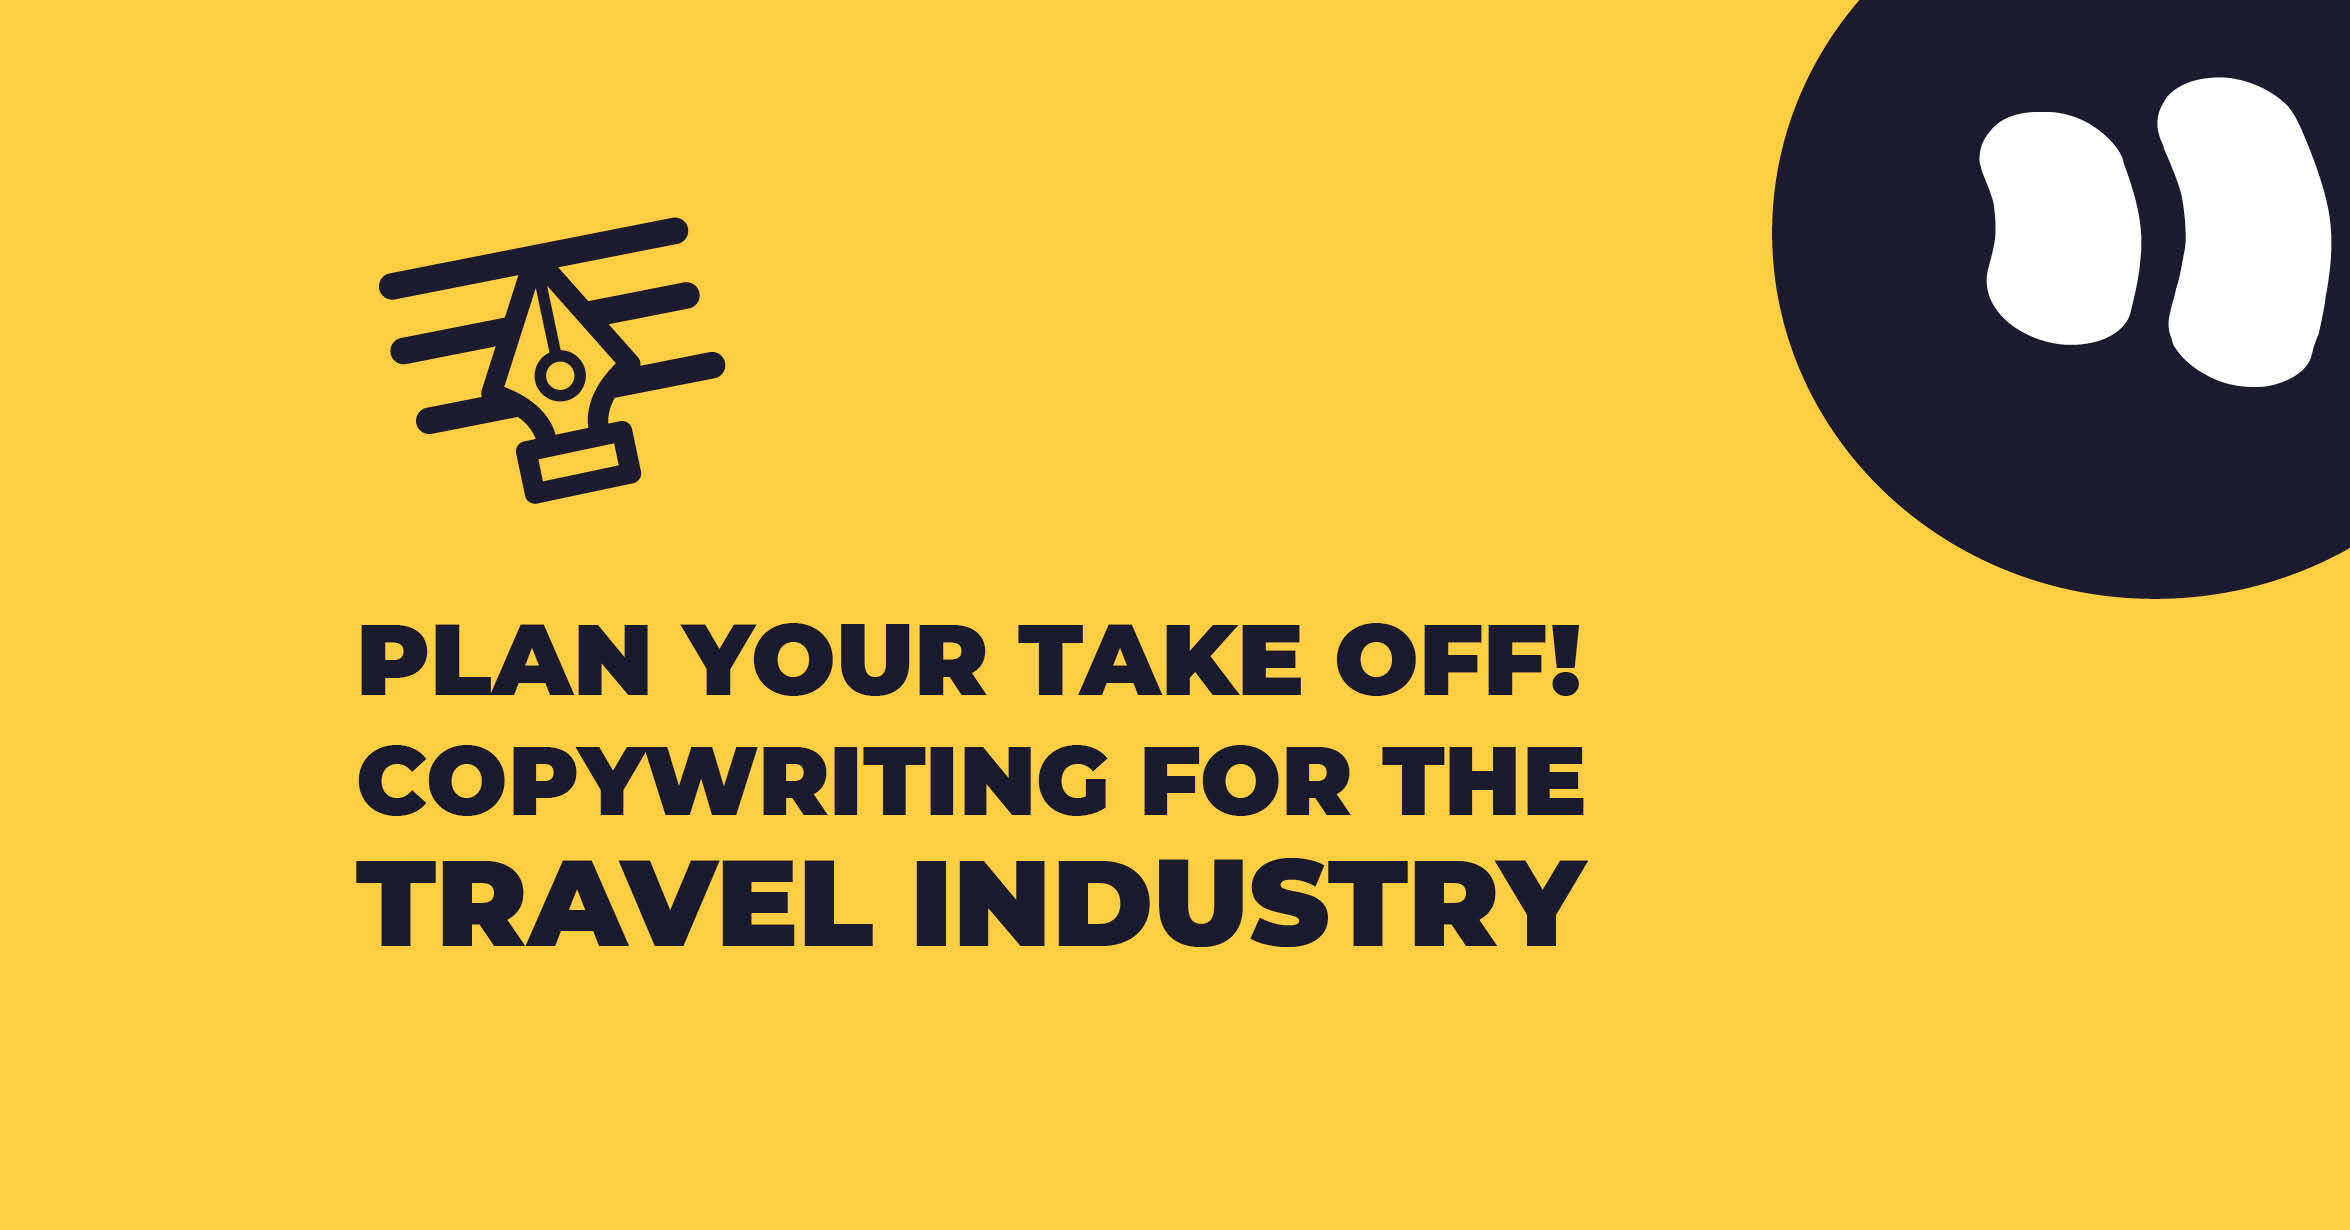 Plan Your ‘take off’ with Copywriting for the Travel Industry